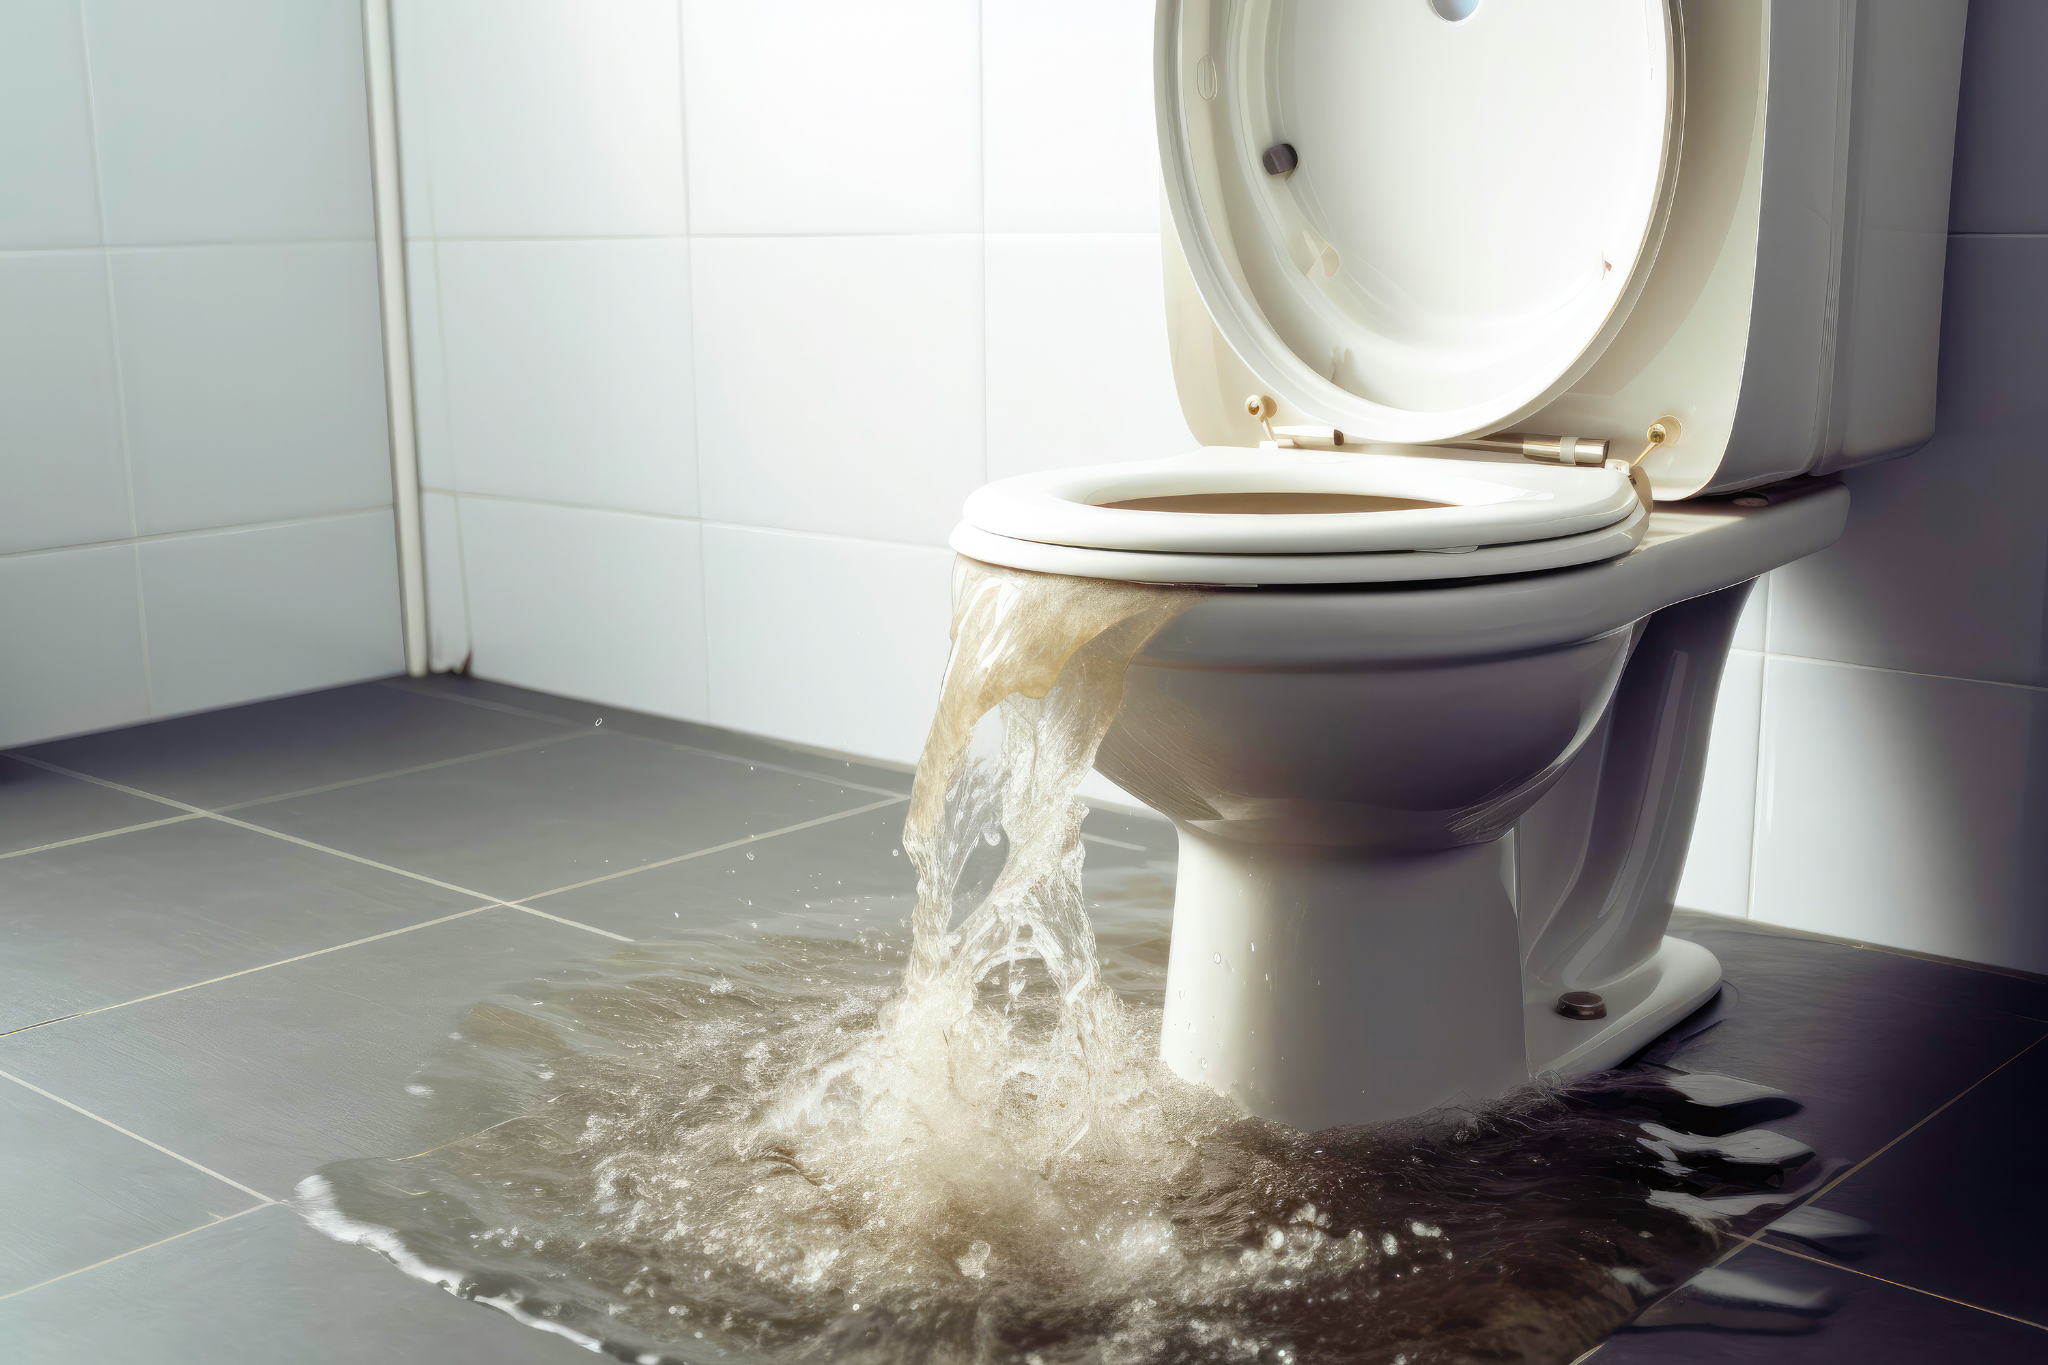 Toilet overflowing with sewage do to broken backwater valve